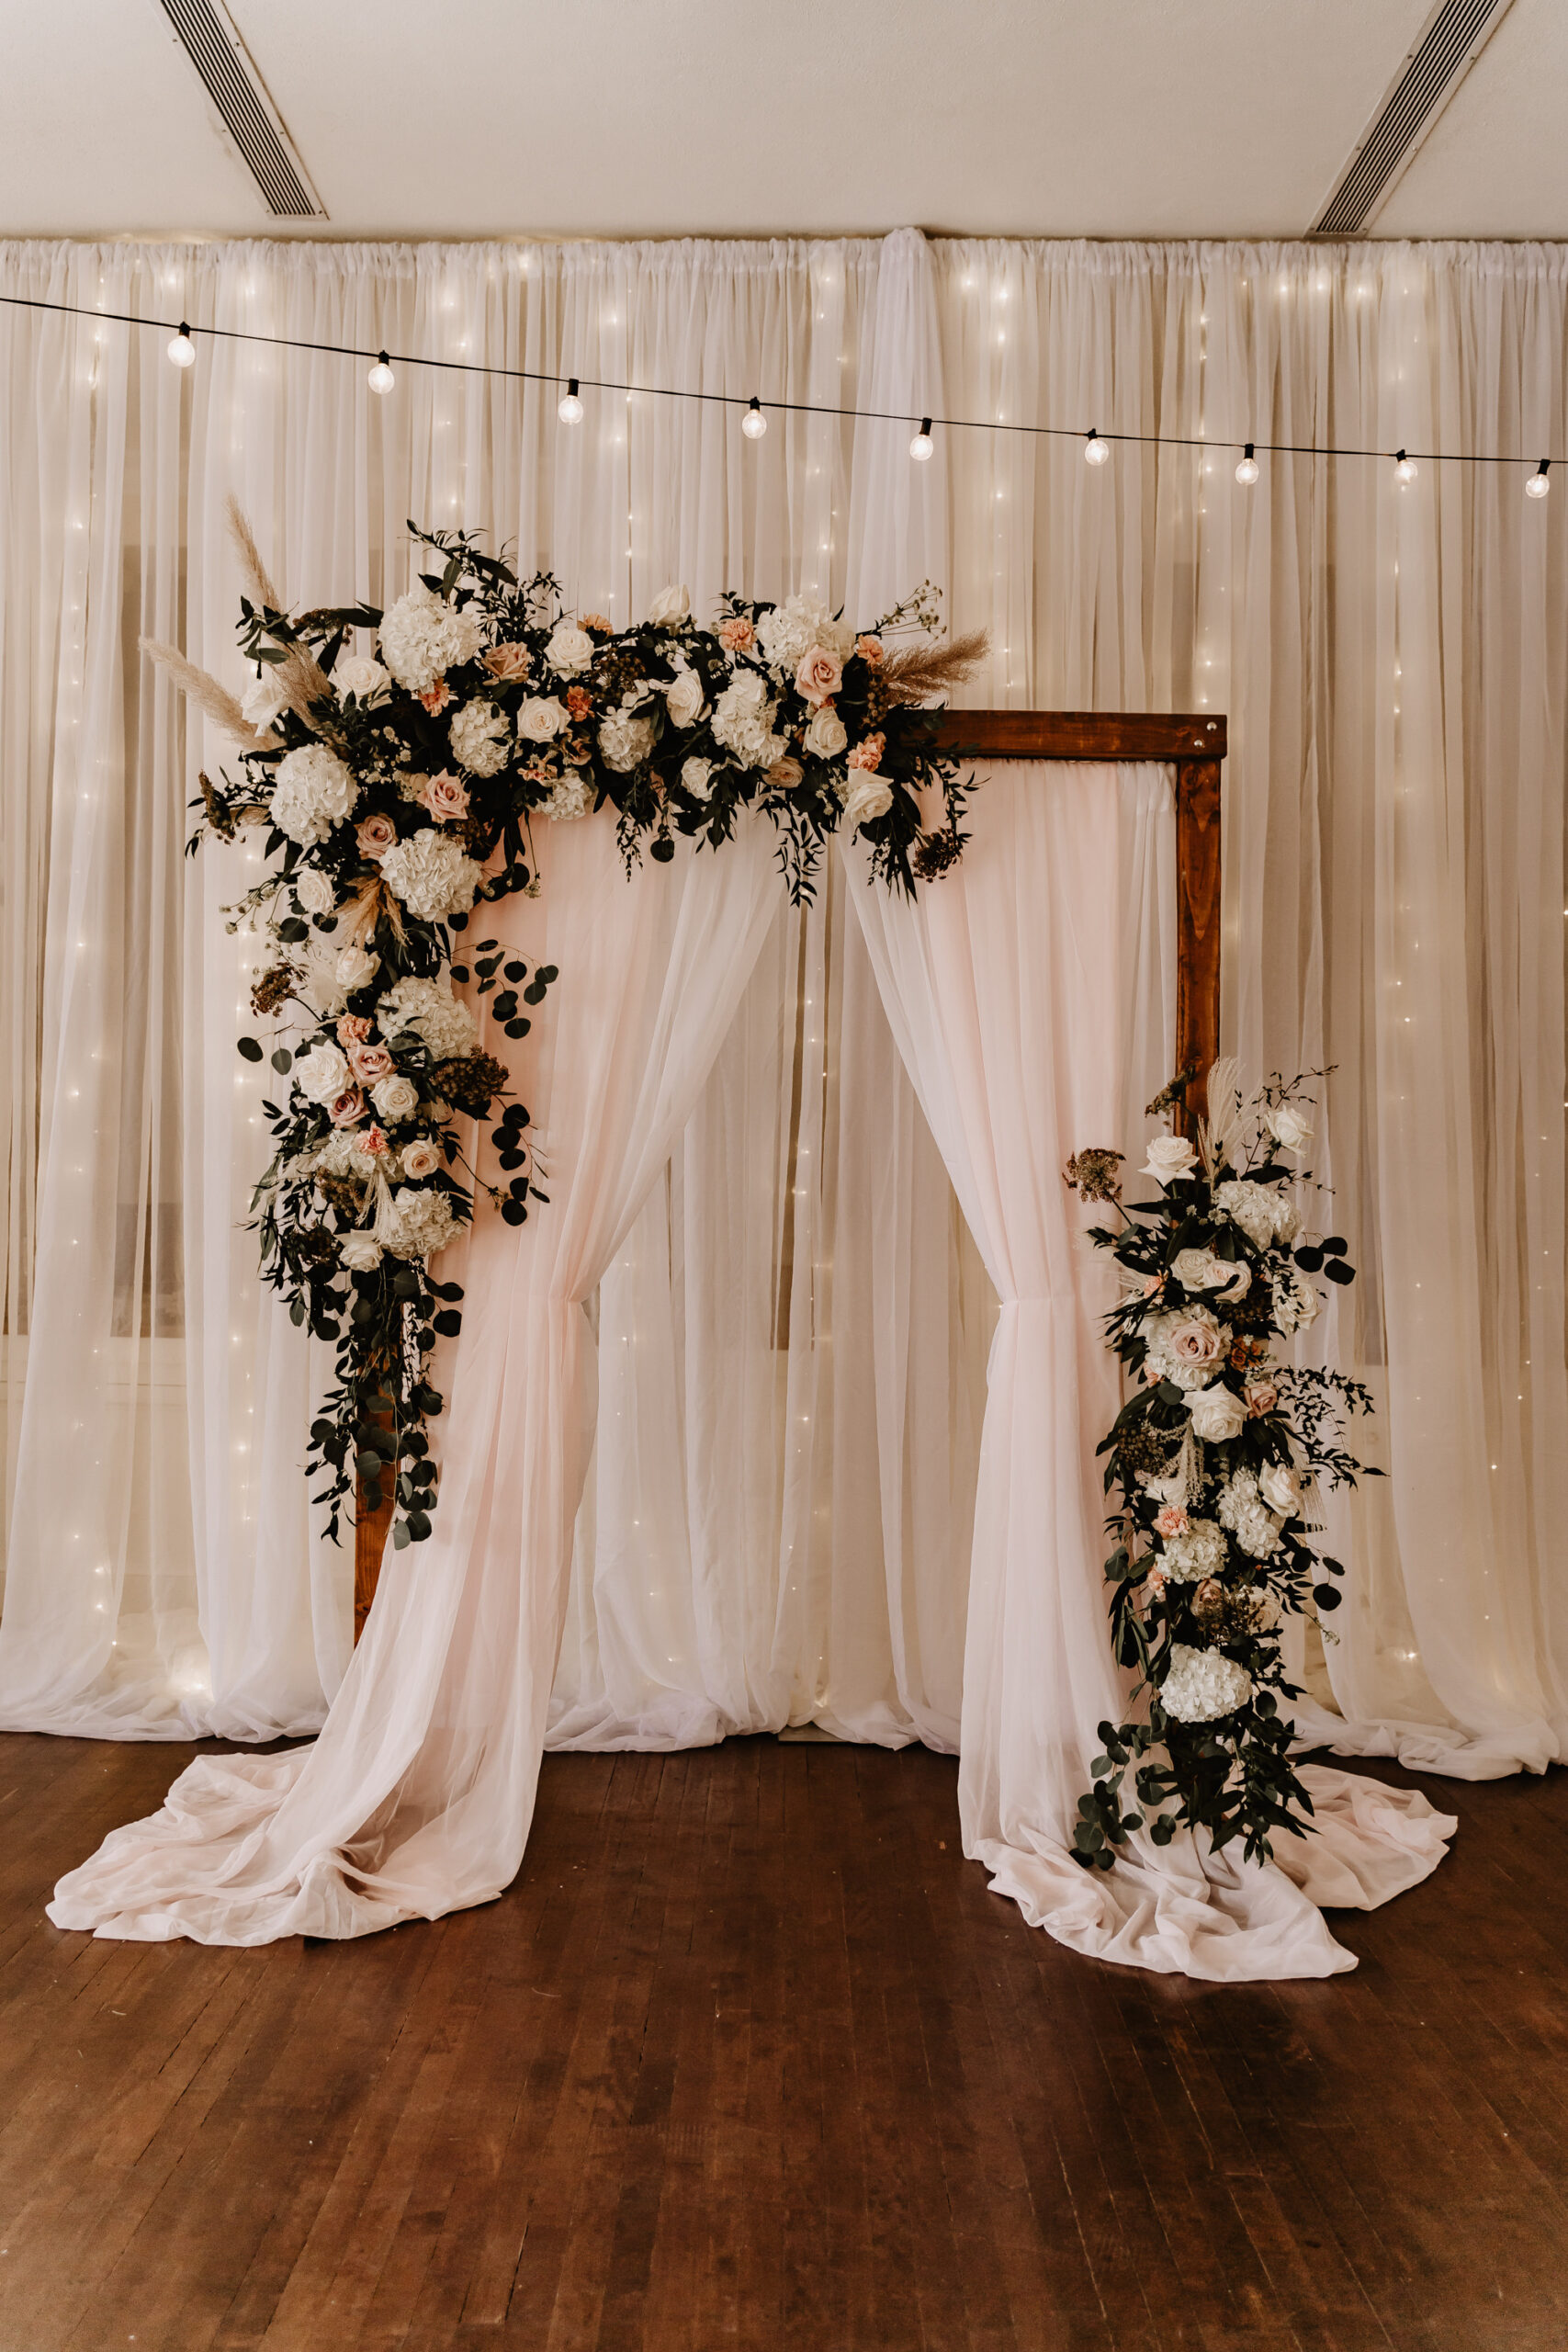 Neutral Boho Modern Wedding Ceremony Decor, Wooden Arch with White Linen Draping, Lush White Hydrangeas, Blush Pink Roses, Greenery, Pampas Grass Floral Arrangements | Tampa Bay Wedding Planner Taylored Affairs | Wedding Rentals Gabro Event Services